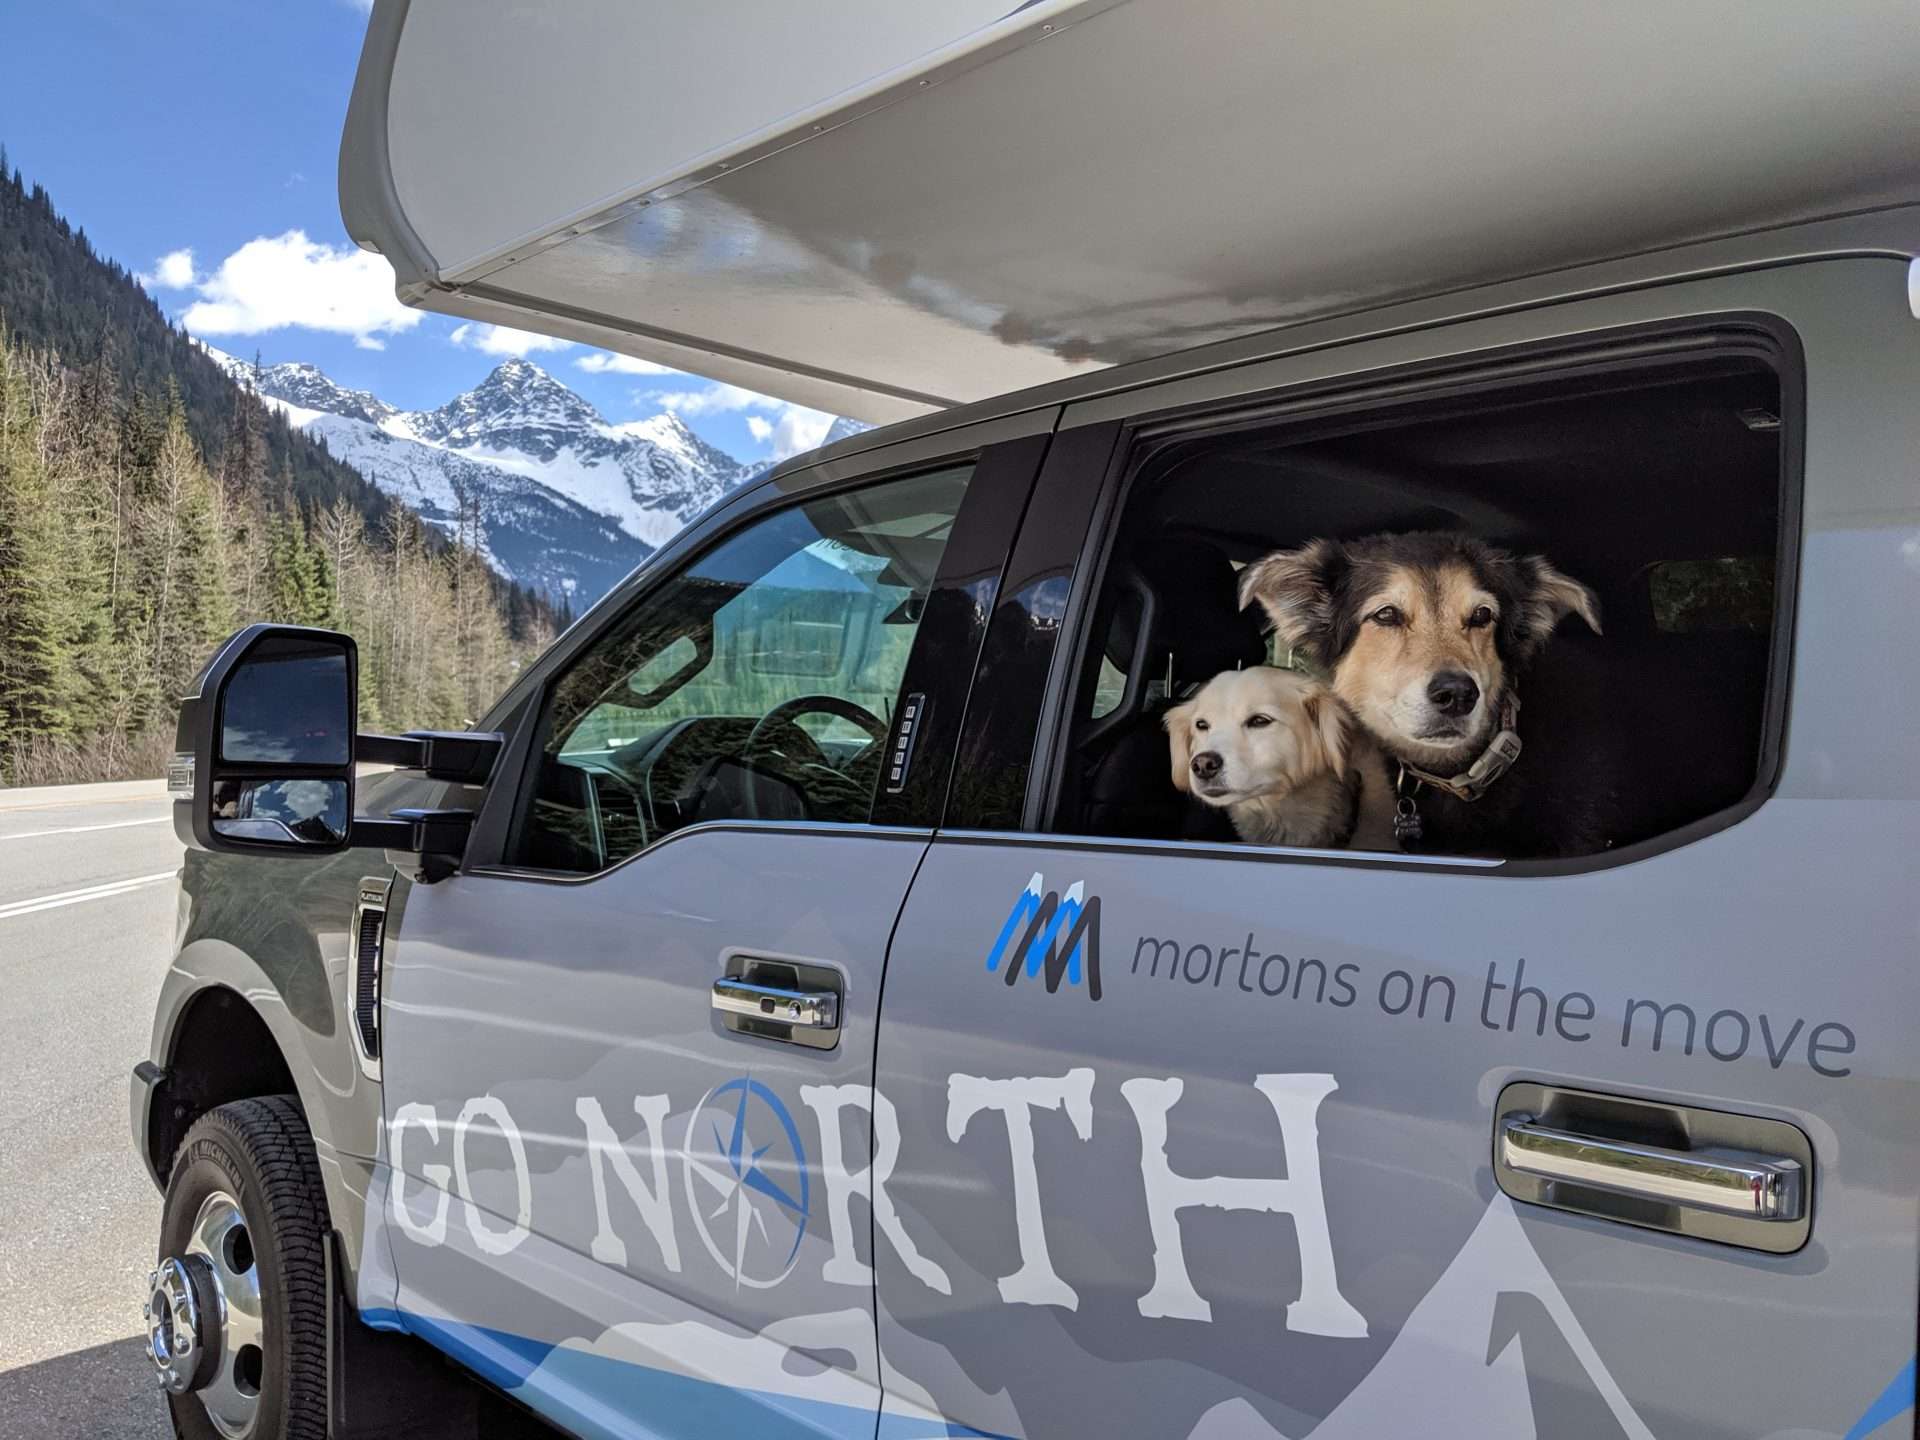 Mortons on the Move dogs isndie truck camper